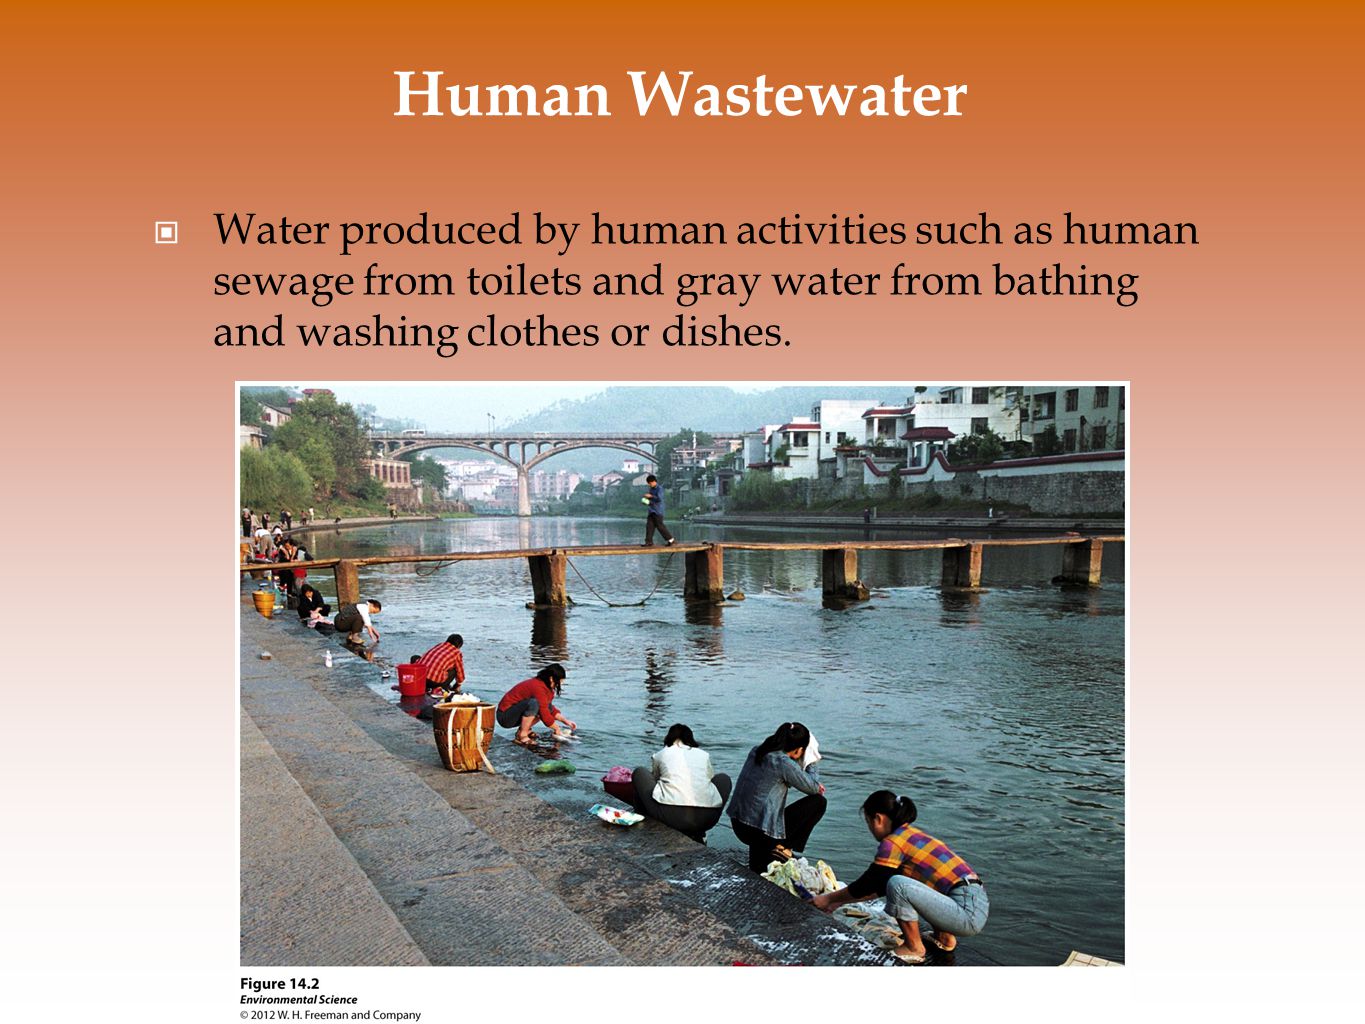 Human Wastewater Water produced by human activities such as human sewage from toilets and gray water from bathing and washing clothes or dishes.